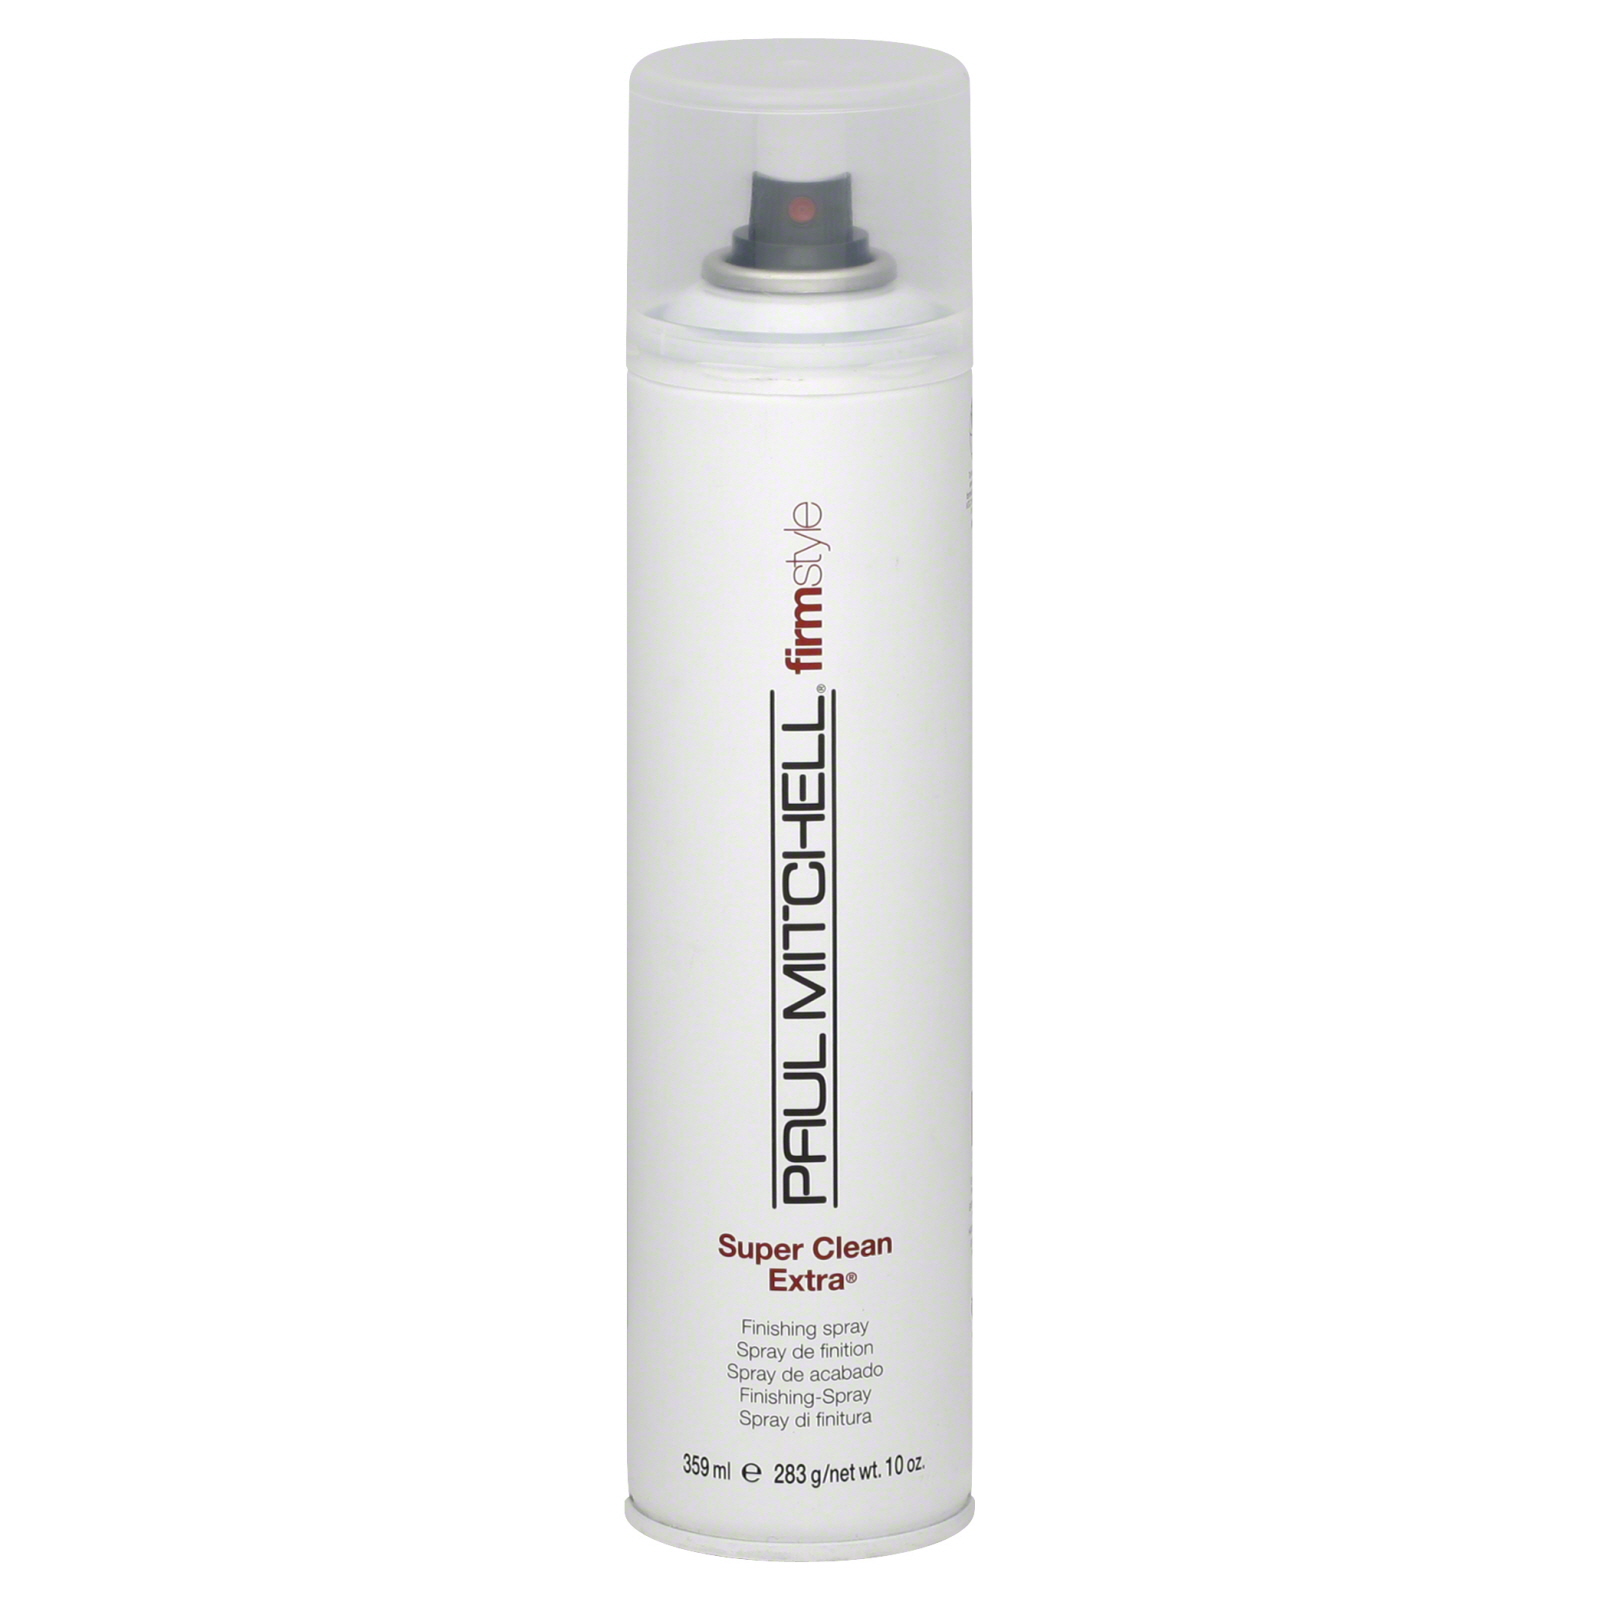 0822142250392 - FIRMSTYLE FINISHING SPRAY, SUPER CLEAN EXTRA, 10 OZ (283 G) 359 ML